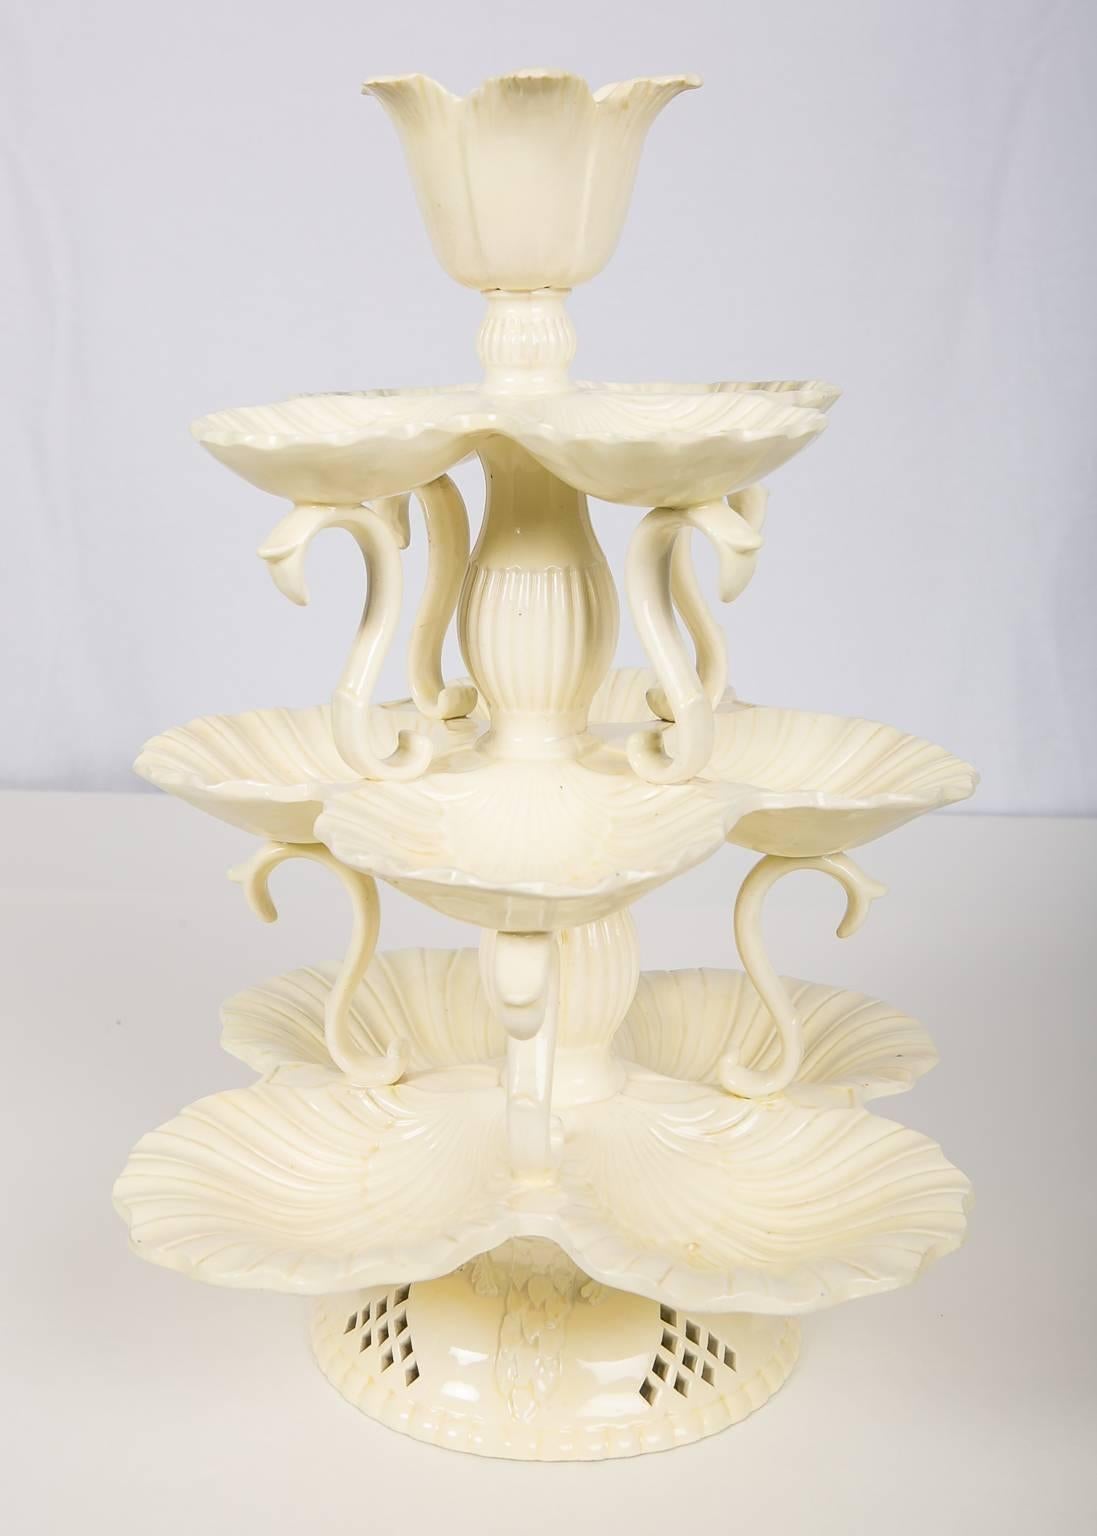 We are thrilled to offer this fabulous large three-tiered 18th-century creamware platt menage, made circa 1780-90 in Staffordshire or Yorkshire, England. 
It is a rare and elegant example of 1the finest 8th-century English creamware.
Modeled as